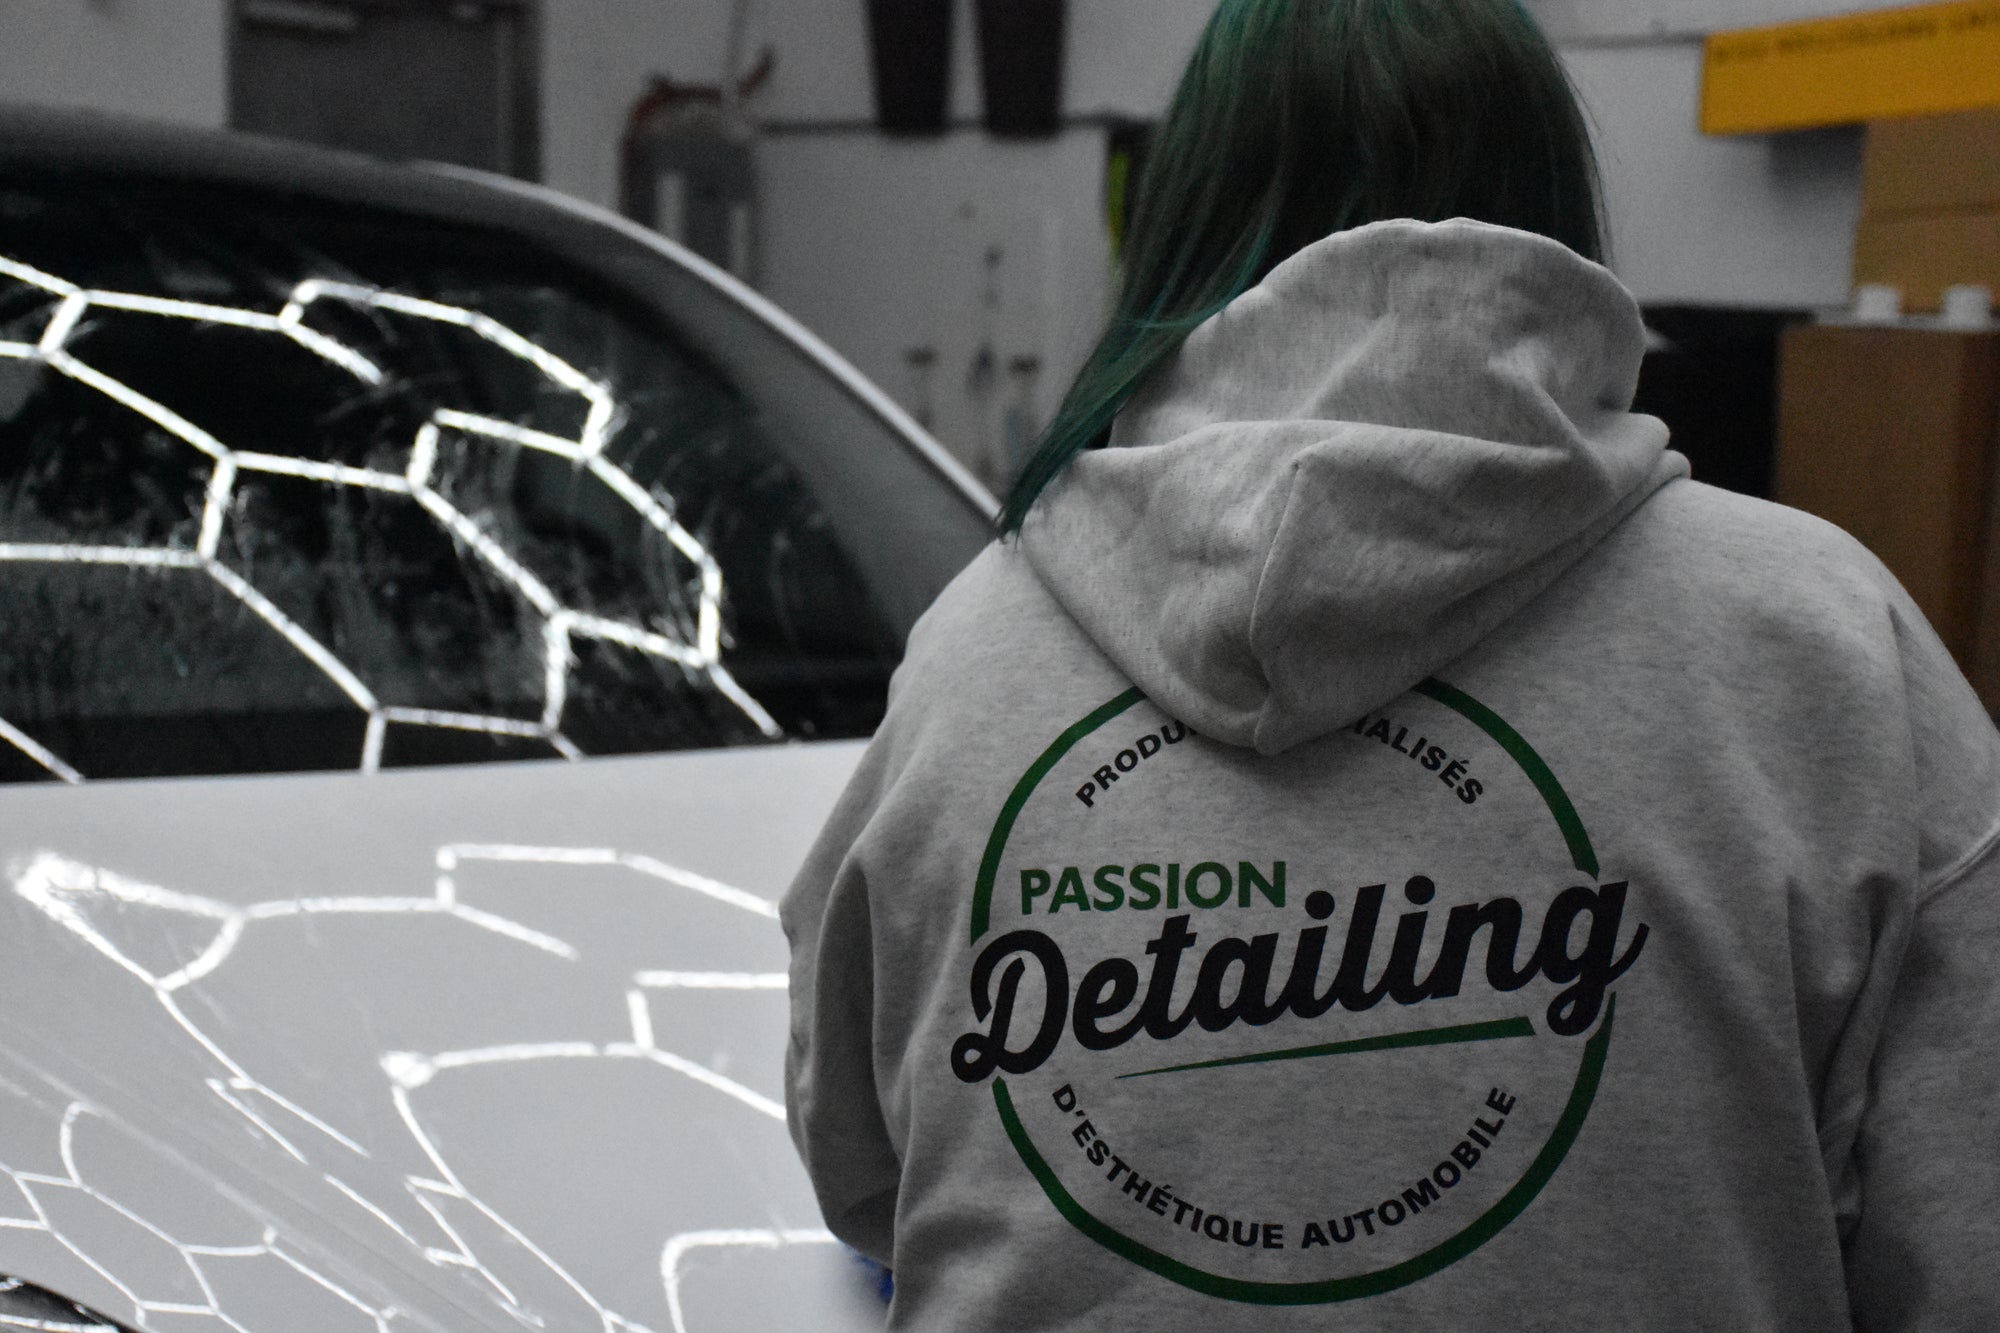 Passion Detailing Hoodie